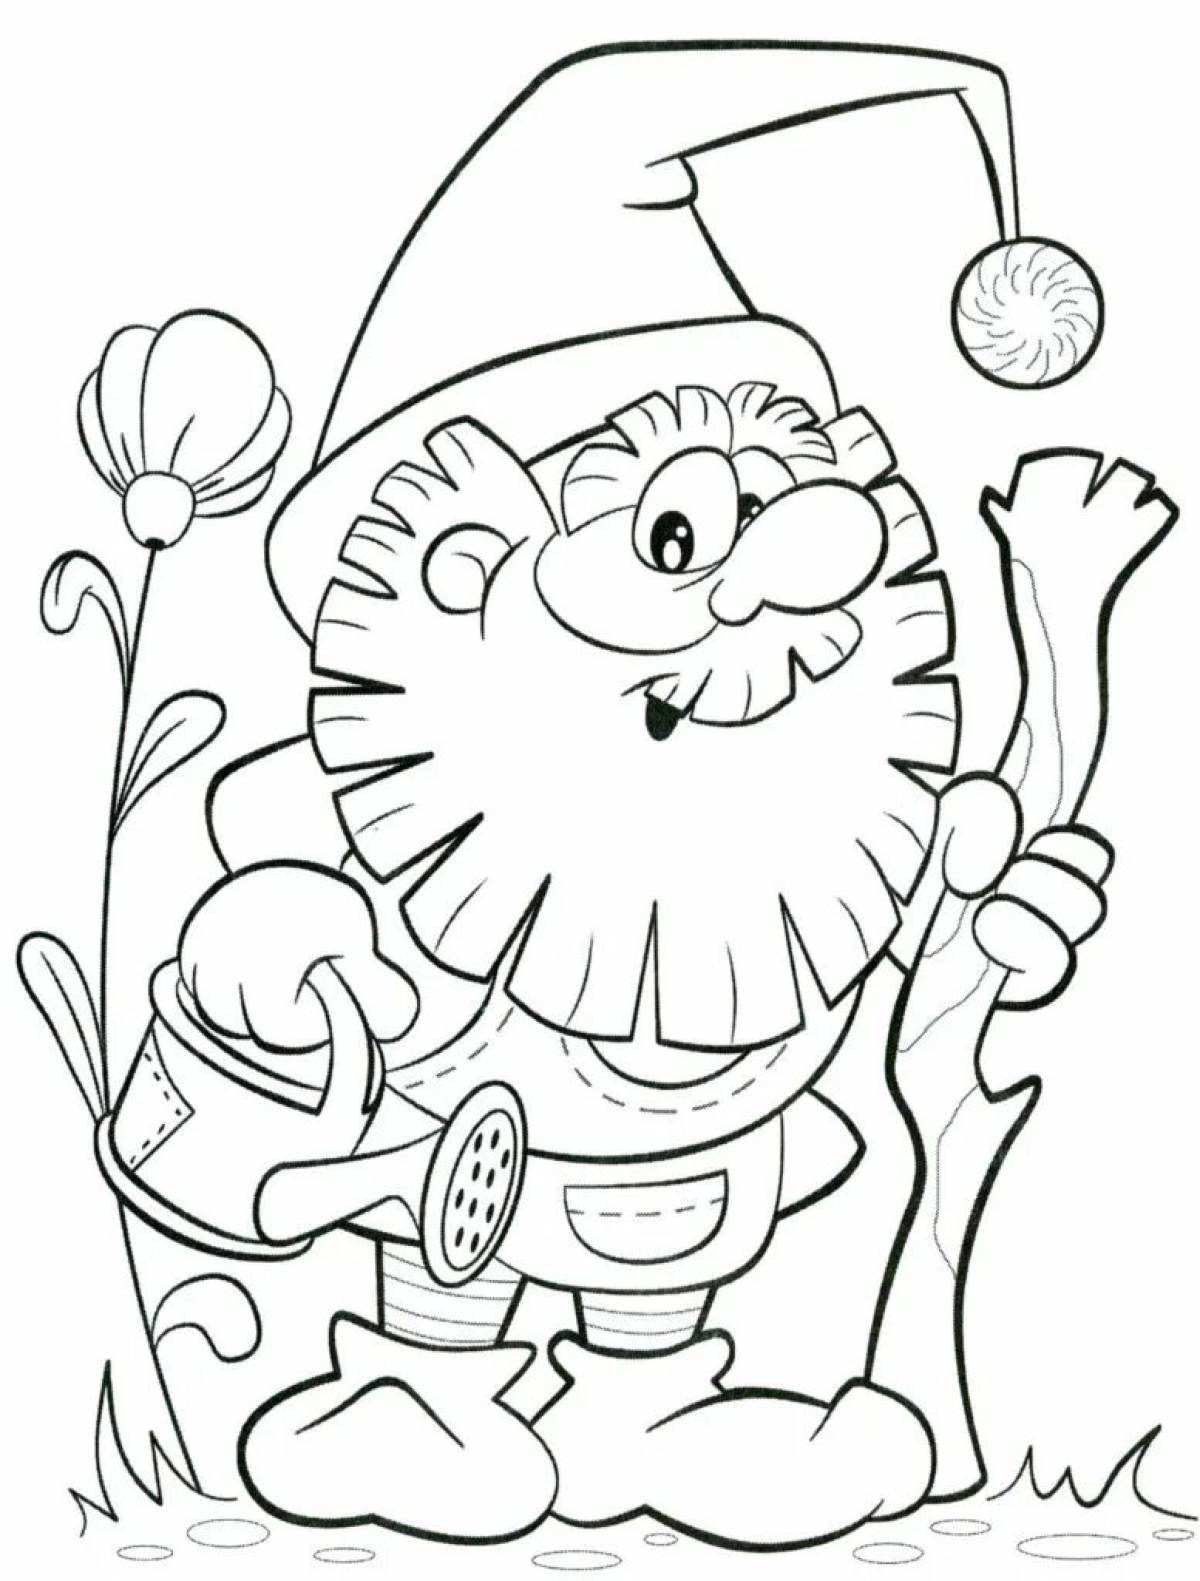 Color-lively brownie coloring page for preschoolers